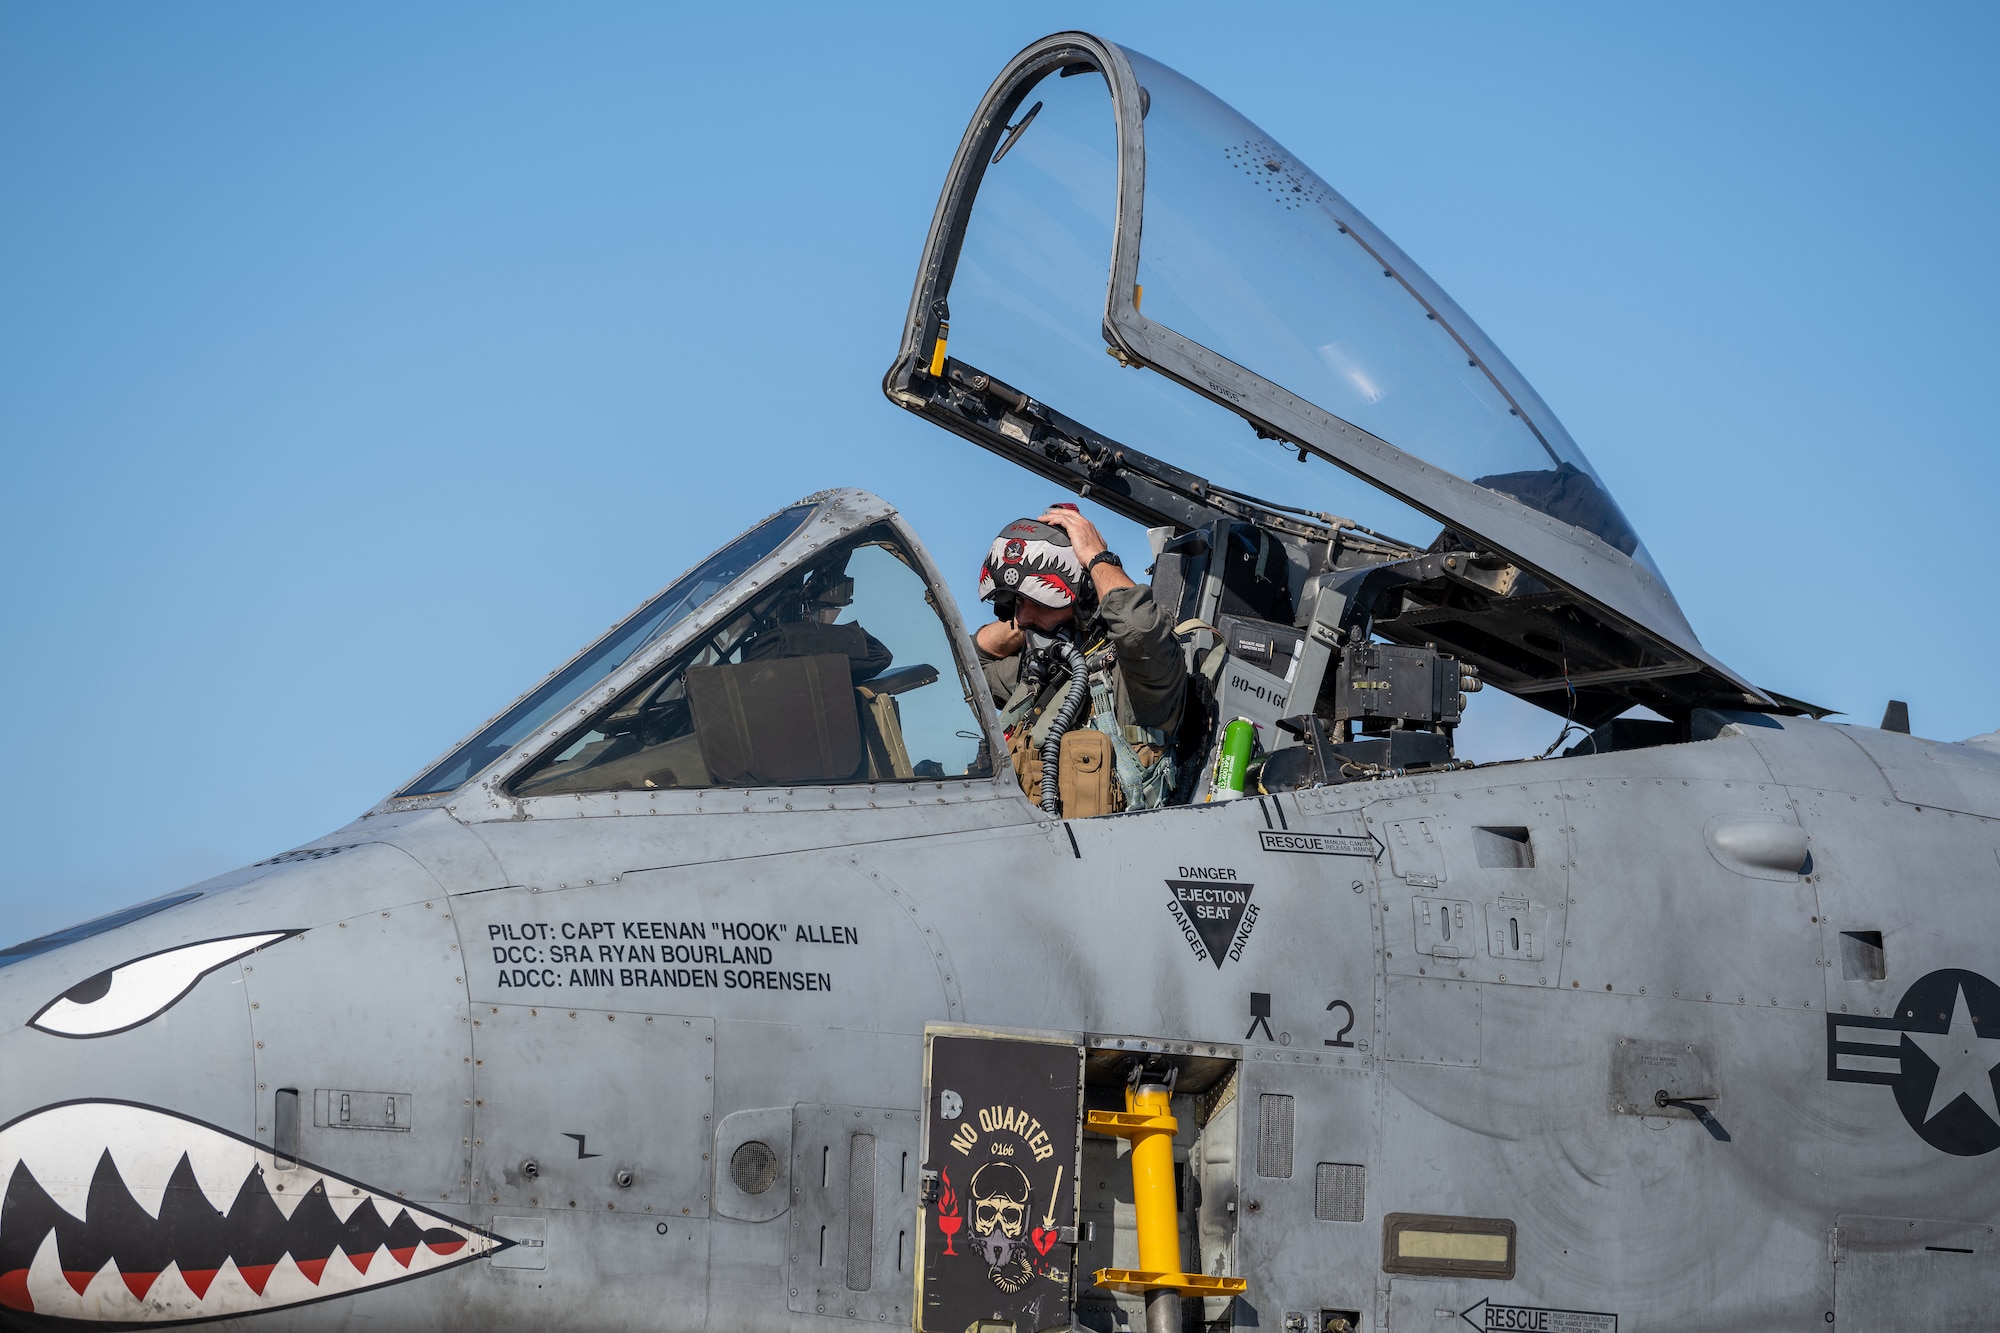 A U.S. Air Force pilot assigned to the 23rd Air Expeditionary Wing  prepares to depart the 156th Wing airfield in an A-10C Thunderbolt II during the Forward Tiger exercise at Muñiz Air National Guard Base, Carolina, Puerto Rico, Feb. 22, 2023. The Puerto Rico Air National Guard provided logistical support during Operation Forward Tiger, a training exercise designed to increase combat readiness, humanitarian assistance and disaster response in the Caribbean. (U.S. Air National Guard photo by Airman 1st Class Gisselle Toro)